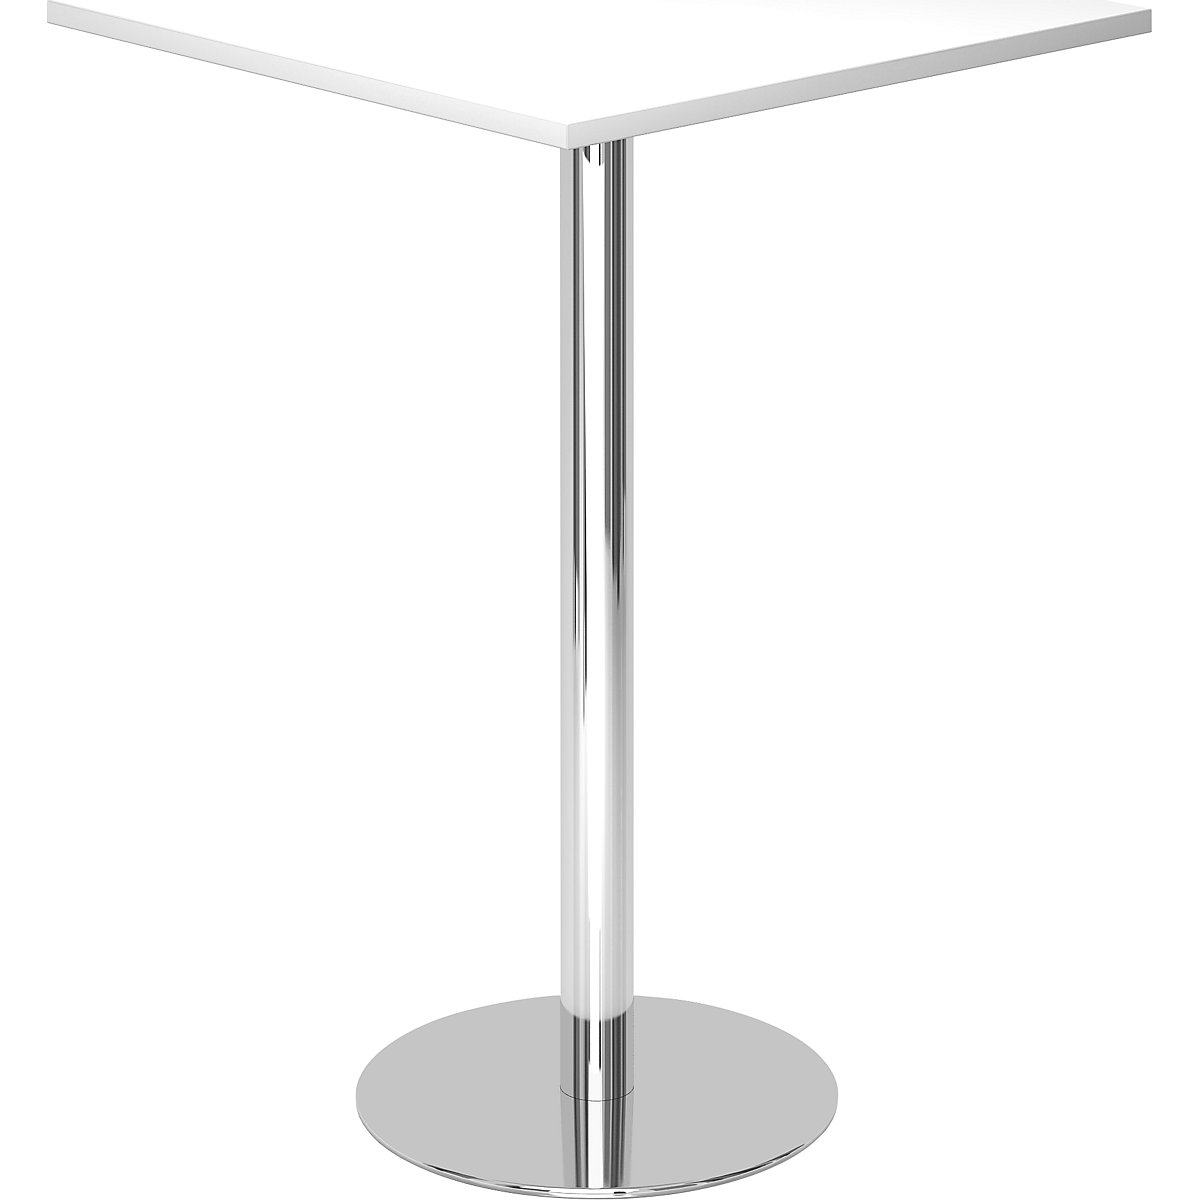 Pedestal table, LxW 800 x 800 mm, 1116 mm high, chrome plated frame, tabletop in white-3